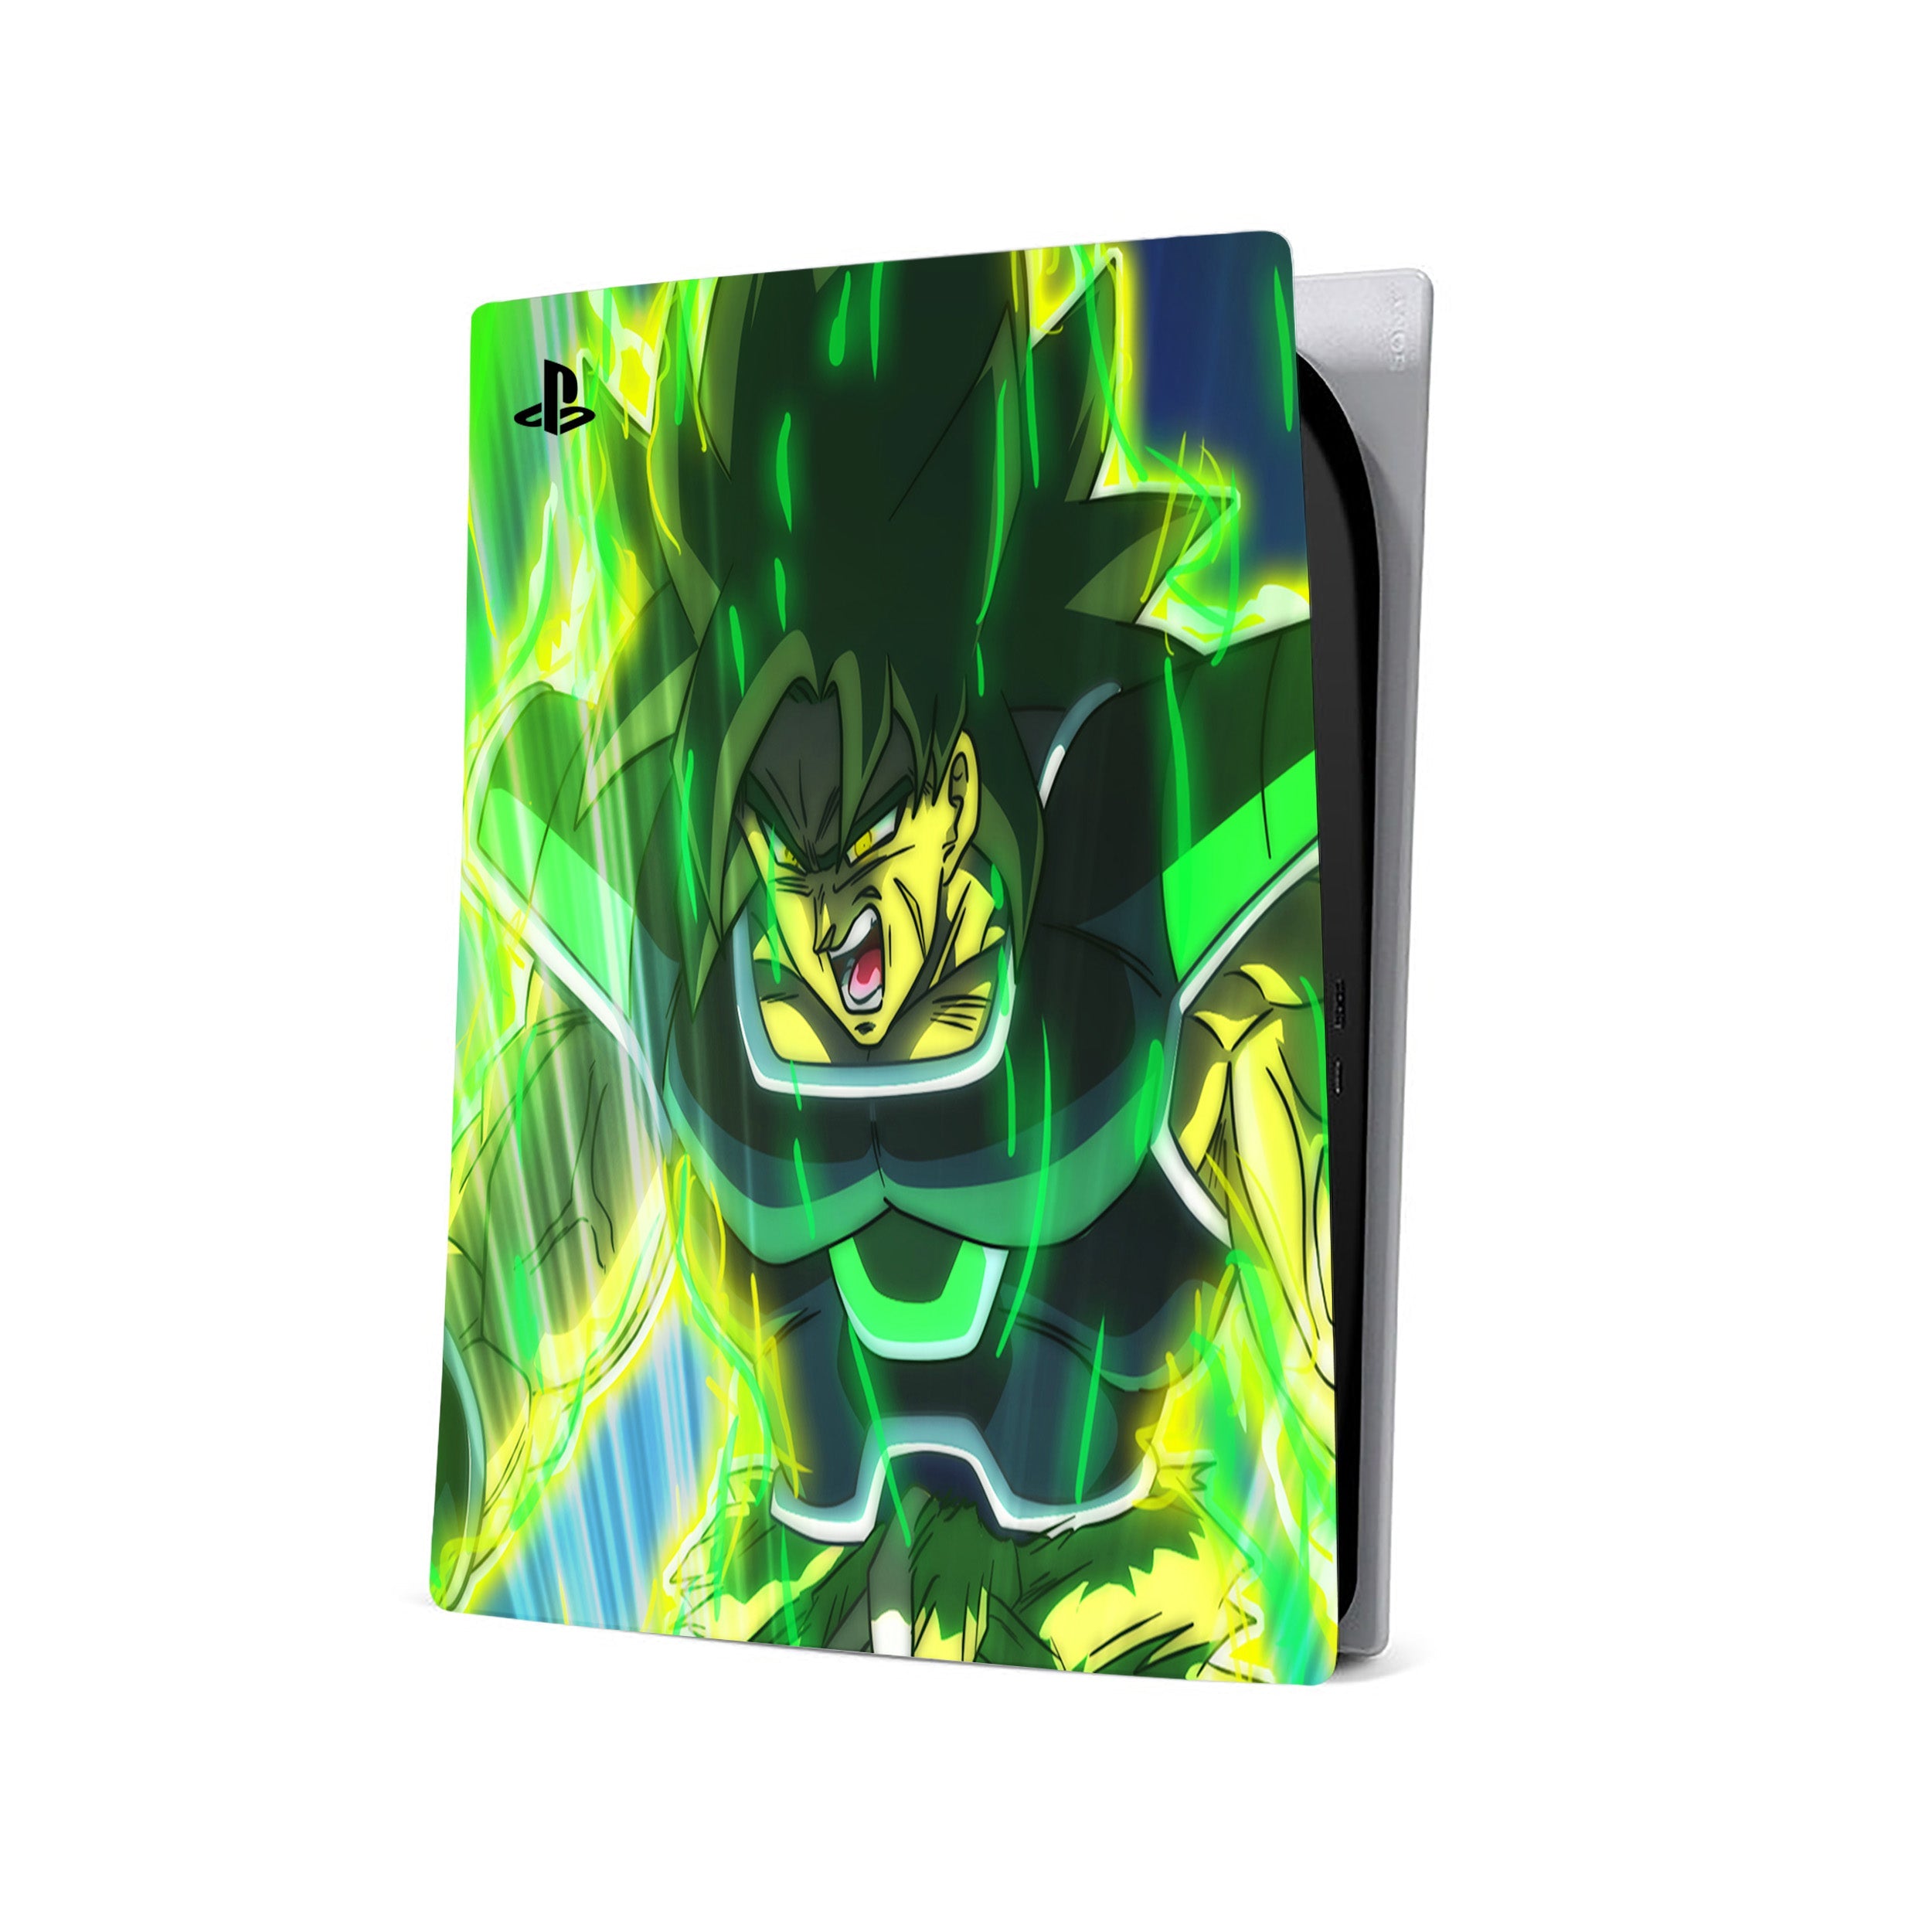 A video game skin featuring a Dragon Ball Super Broly design for the PS5.